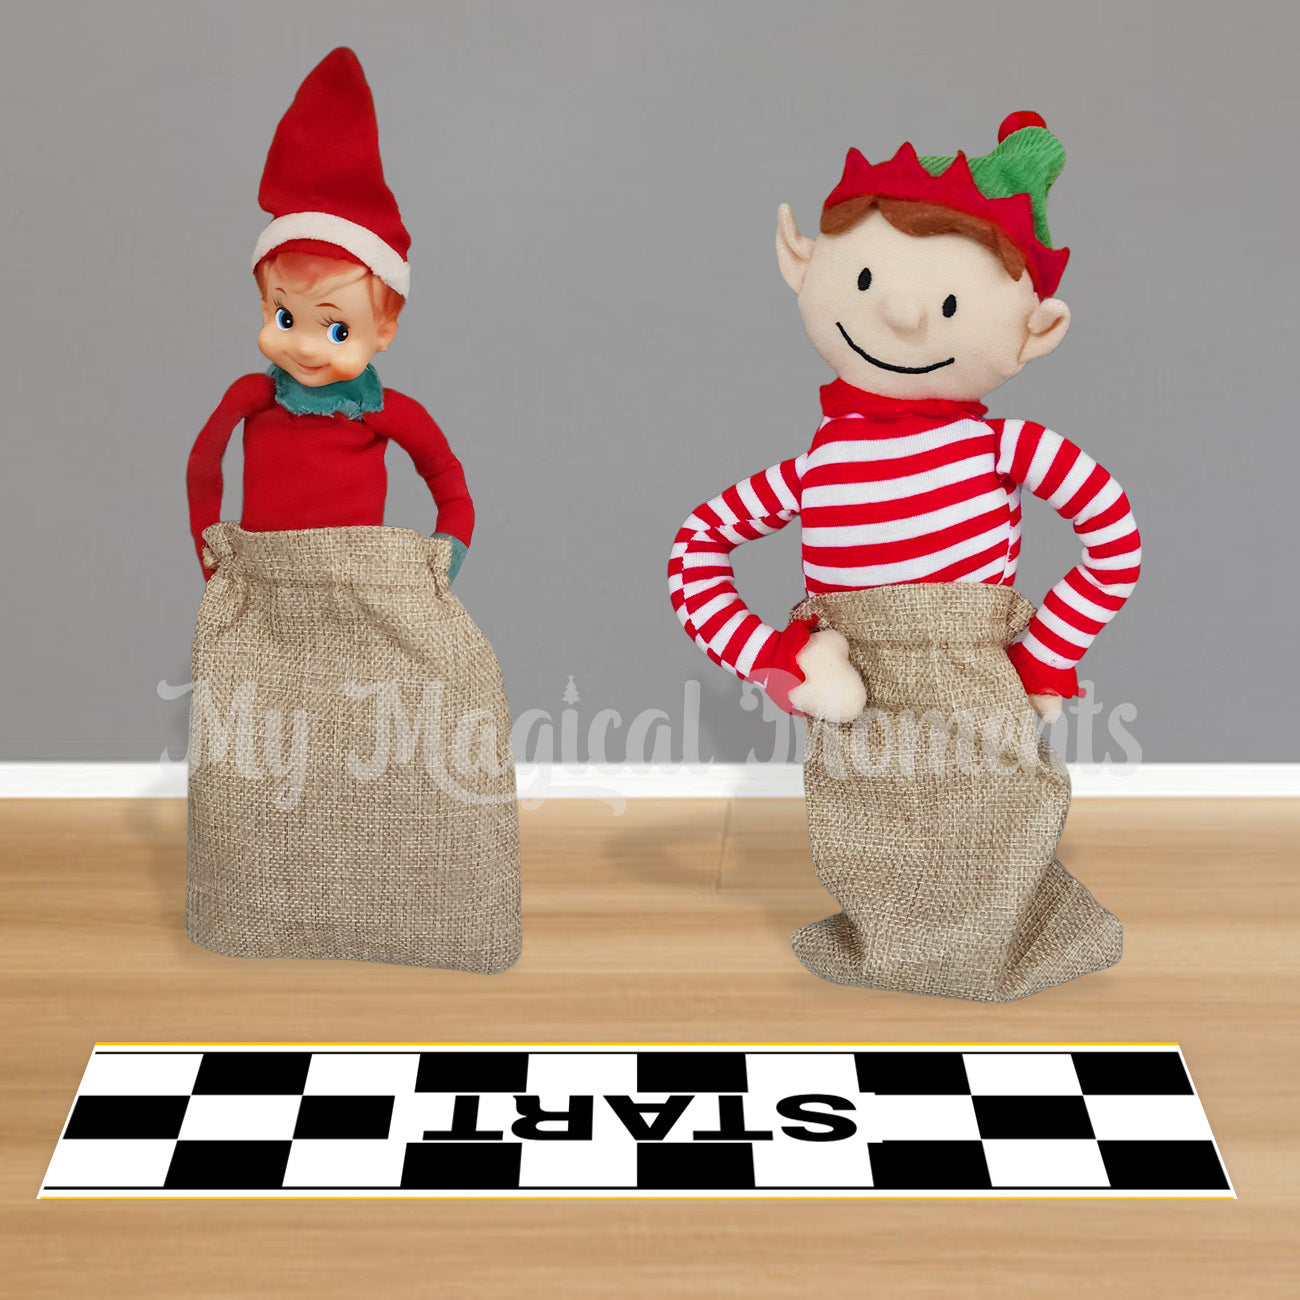 Elves Getting ready to race with a start lineprintable